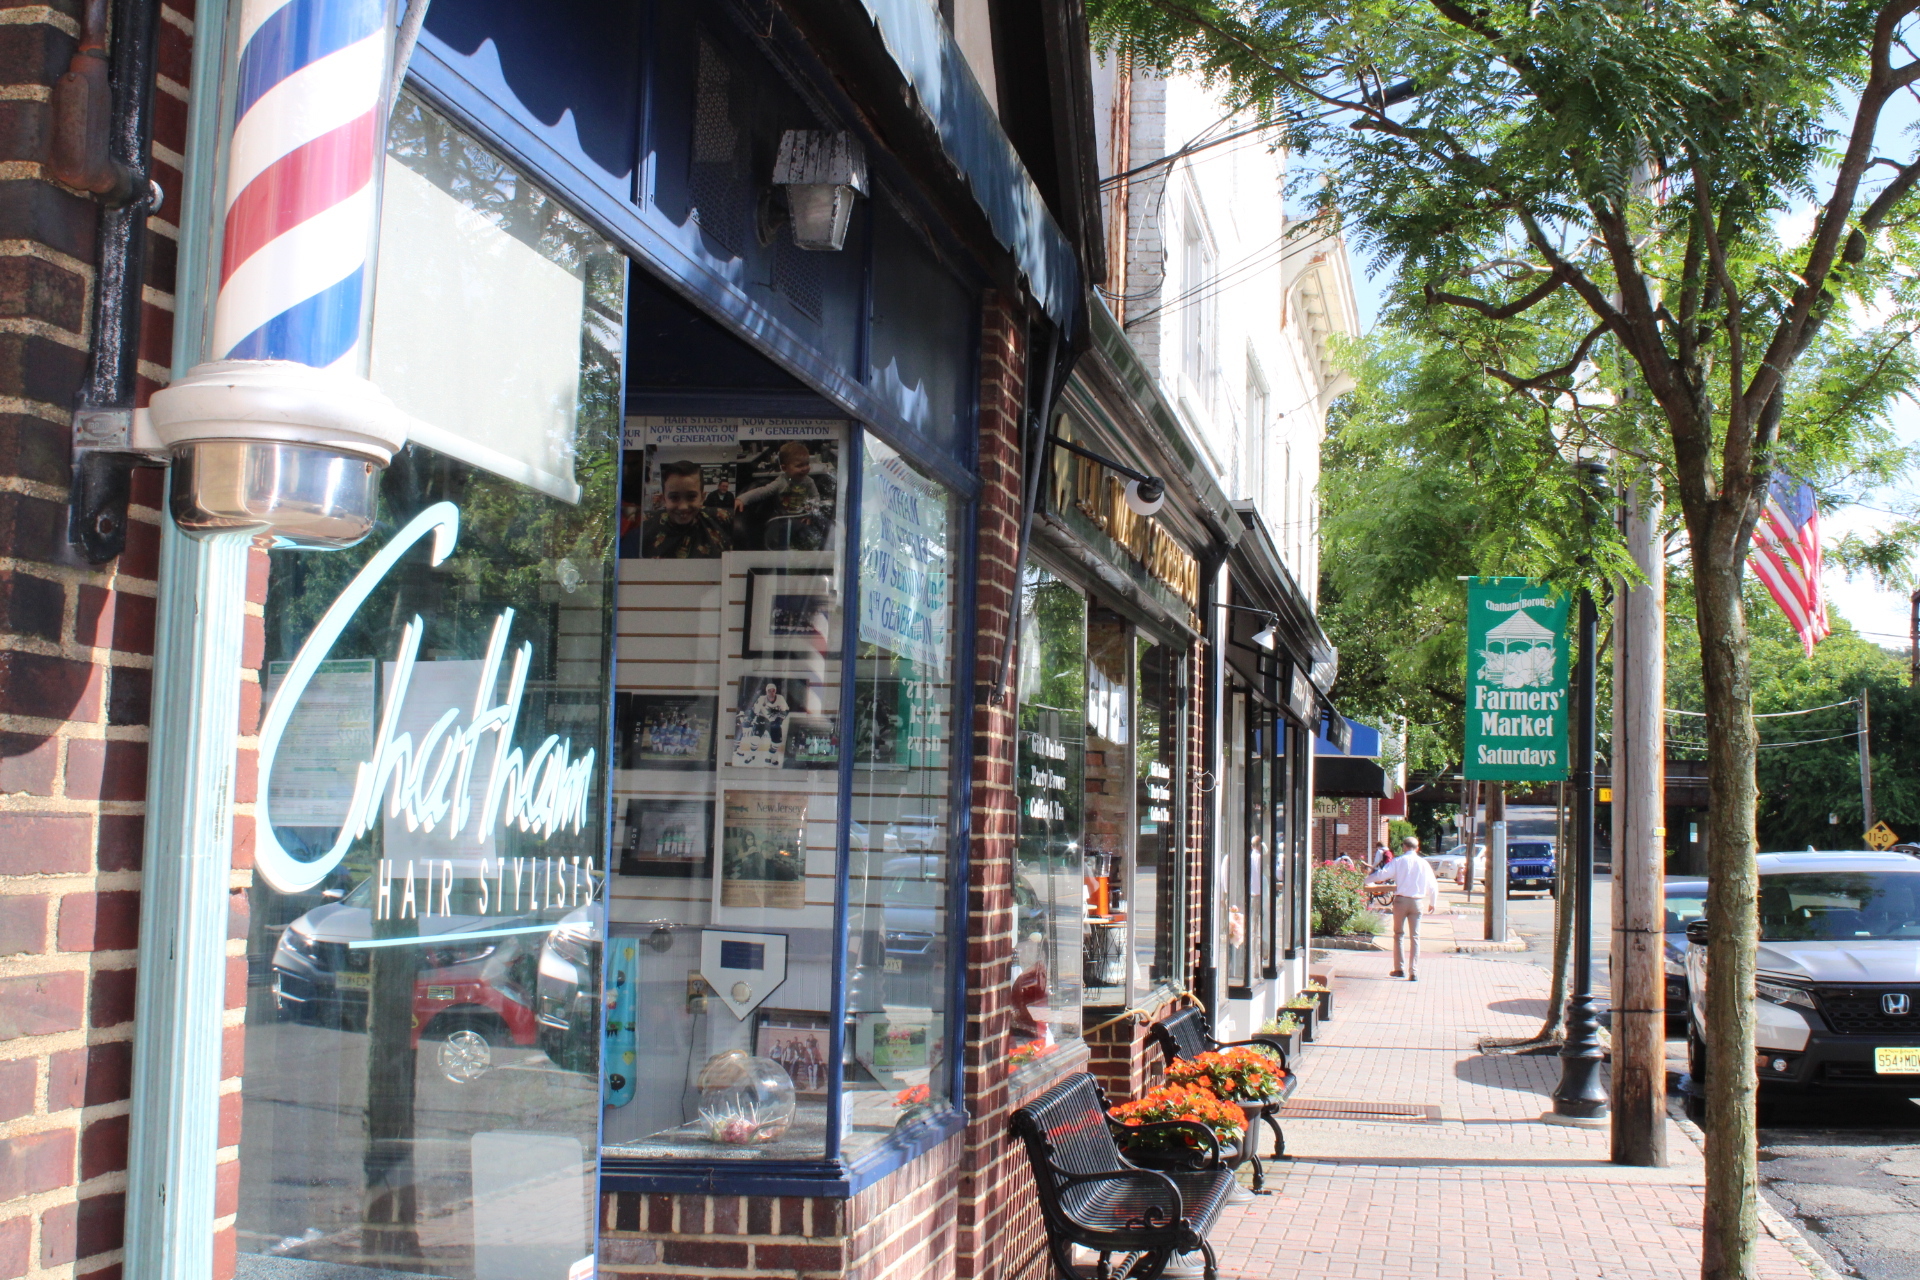 Row of shops and boutiques in downtown Chatham Borough, NJ